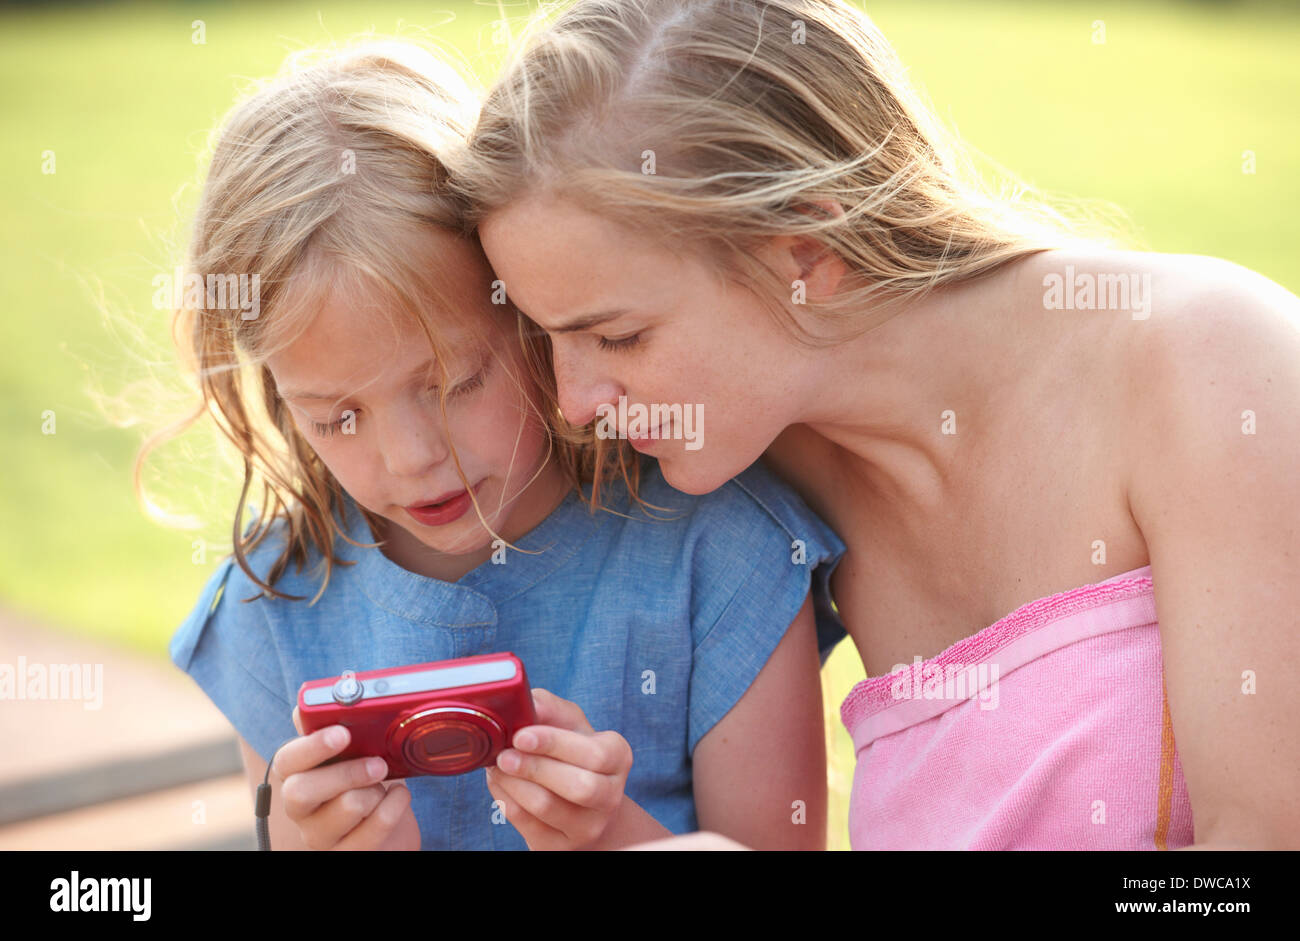 Mother and daughter reviewing photographs on digital camera Stock Photo